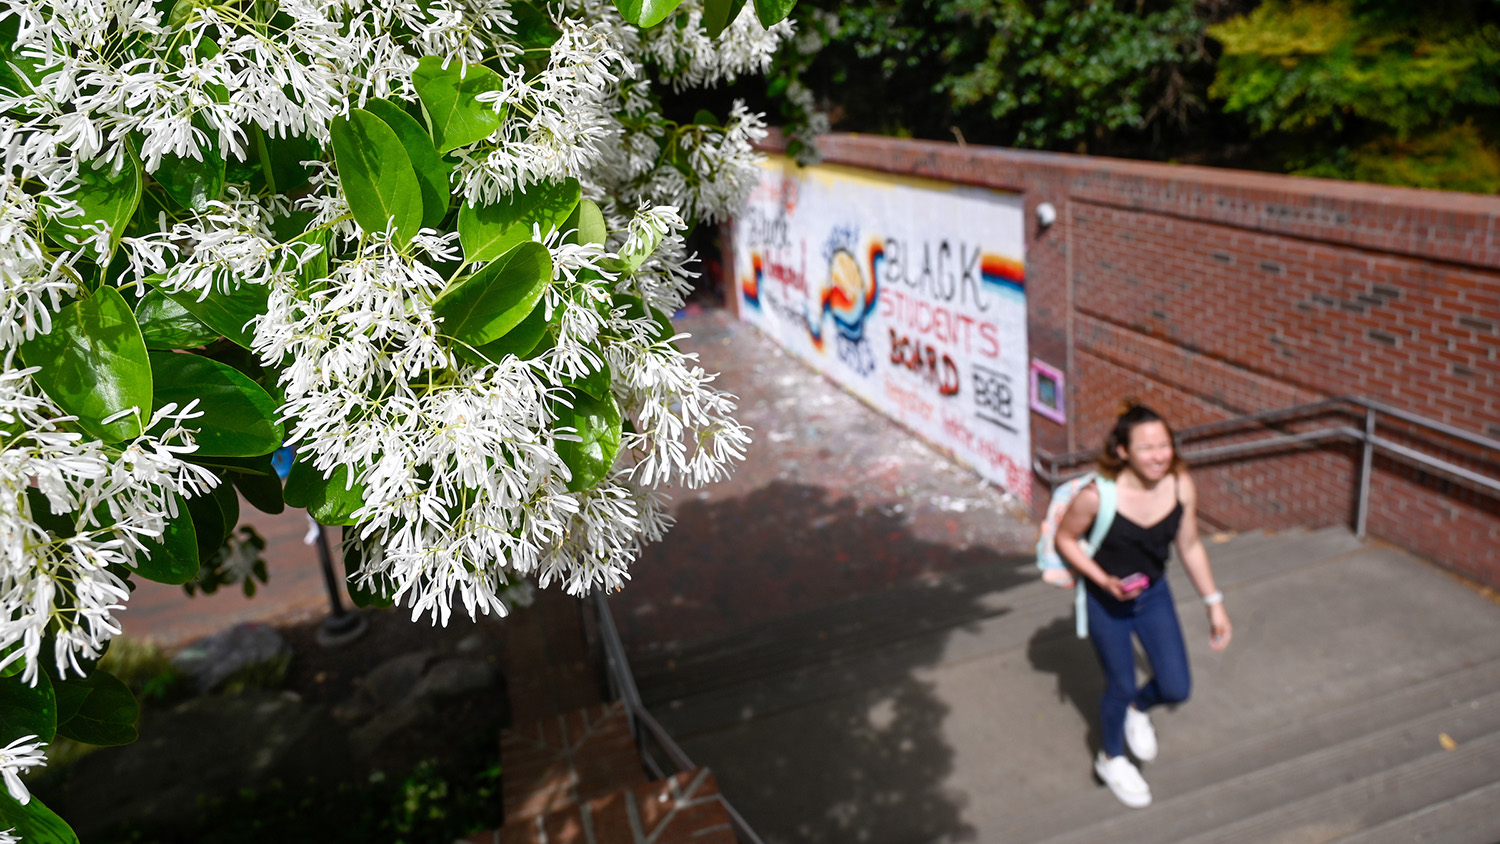 A student walks by a tree with fresh blooms during springtime by the free expression tunnel.